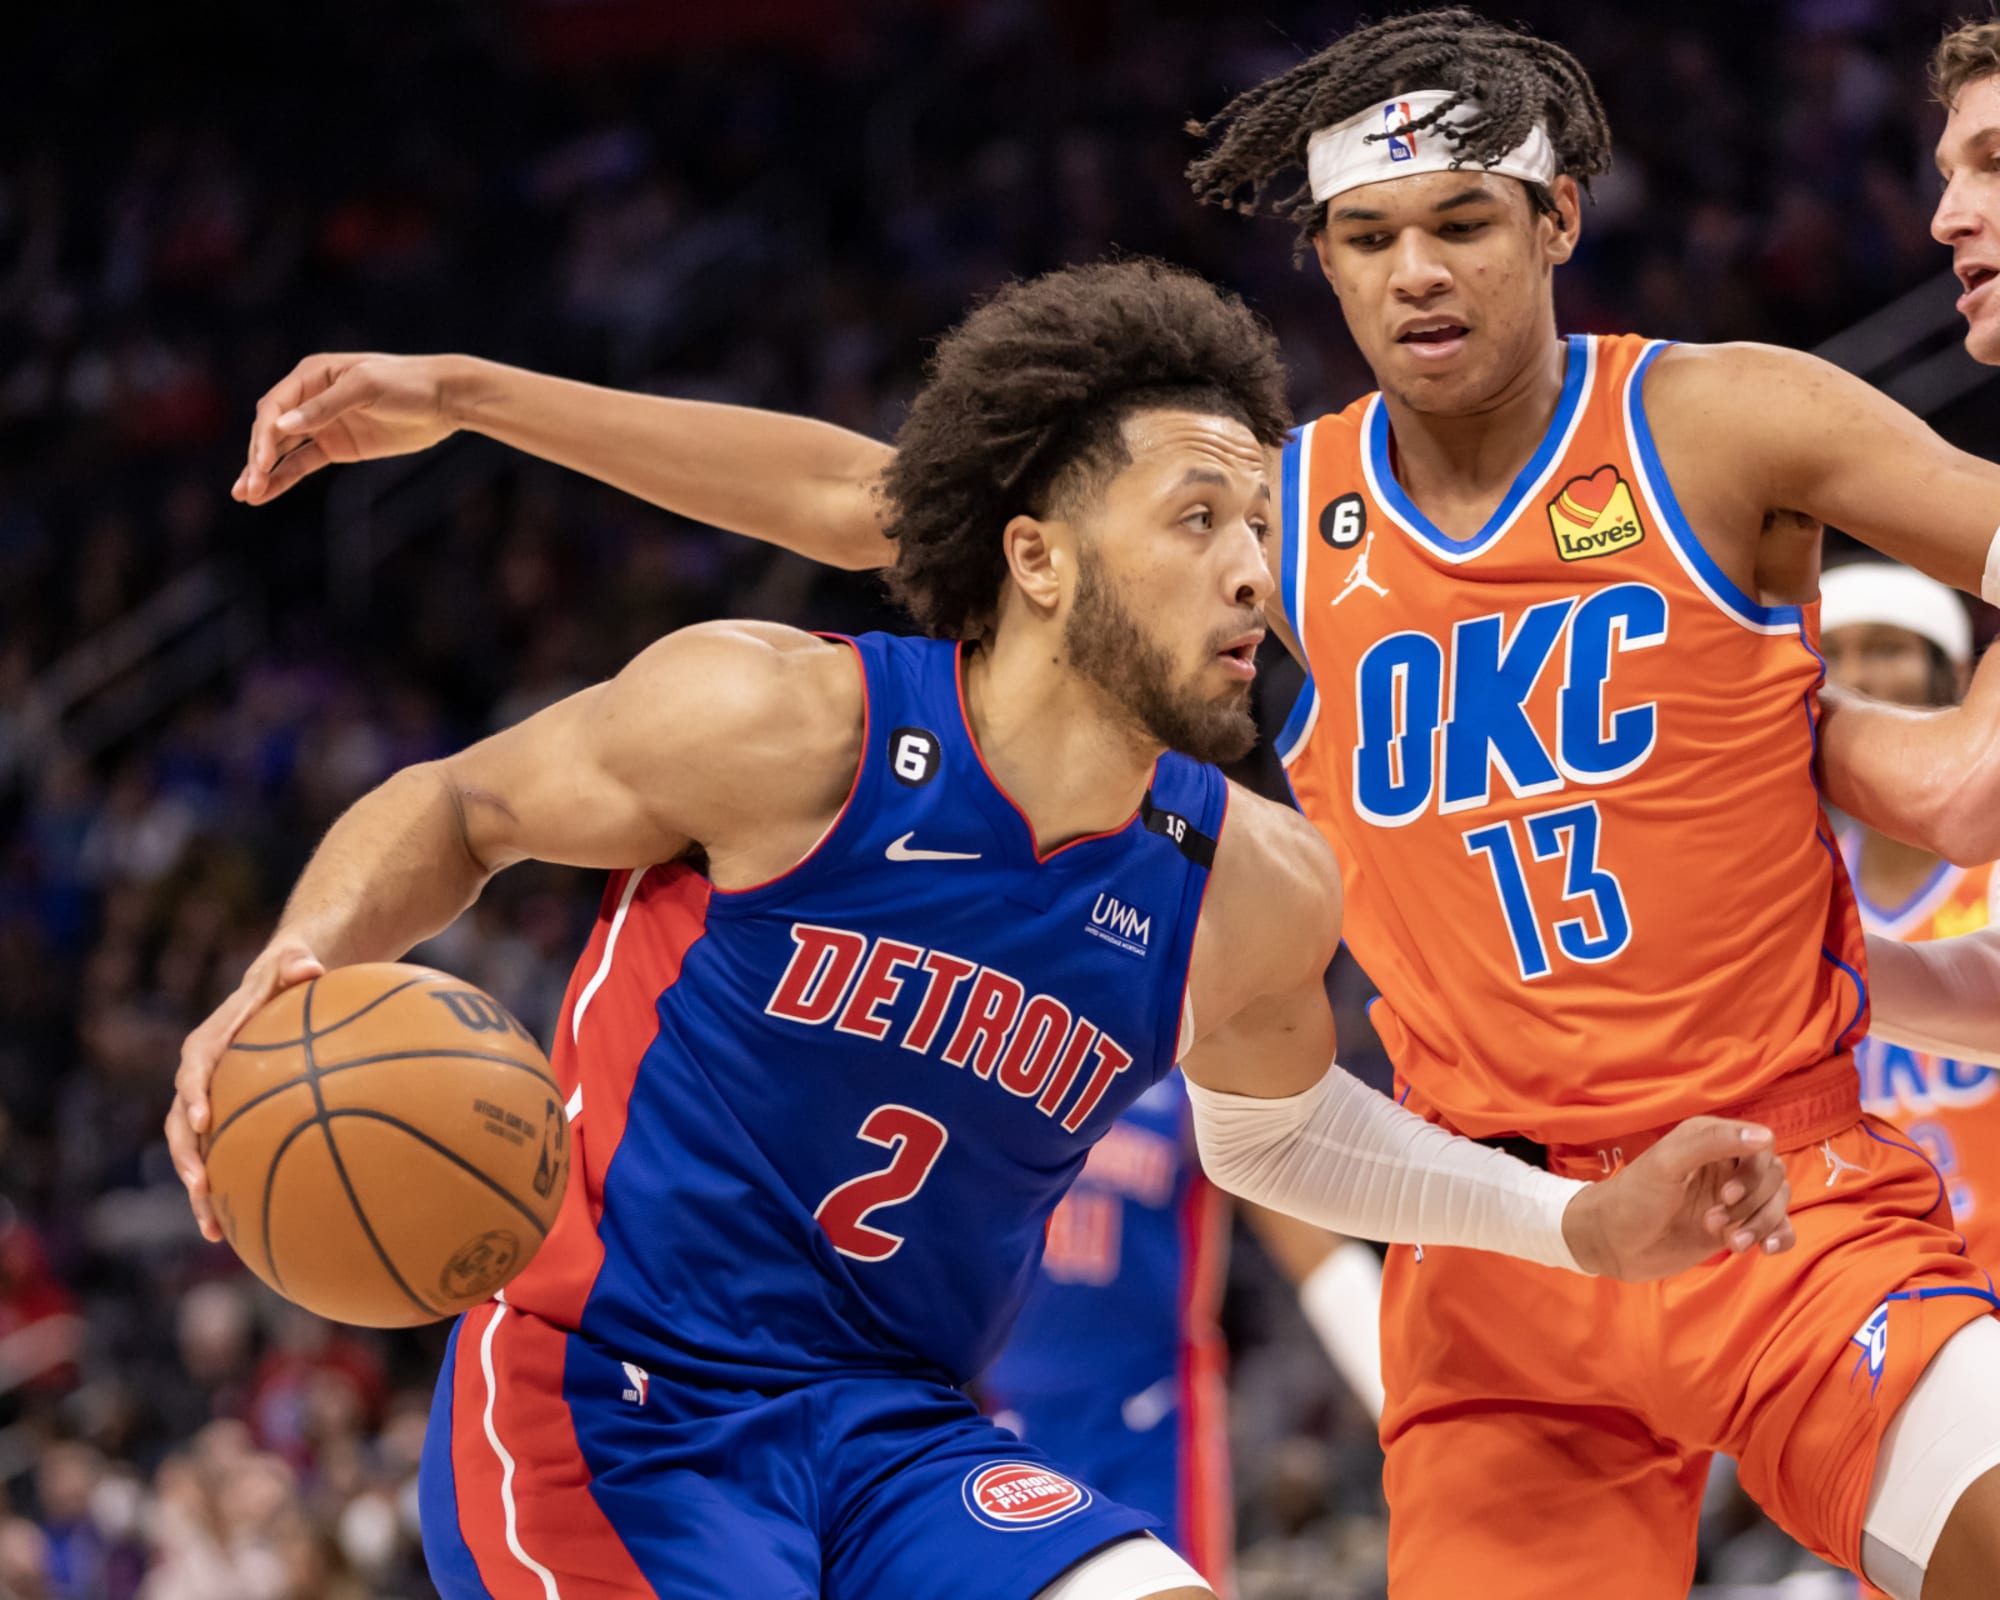 Detroit Pistons fall to New York Knicks; Marvin Bagley III scores 27